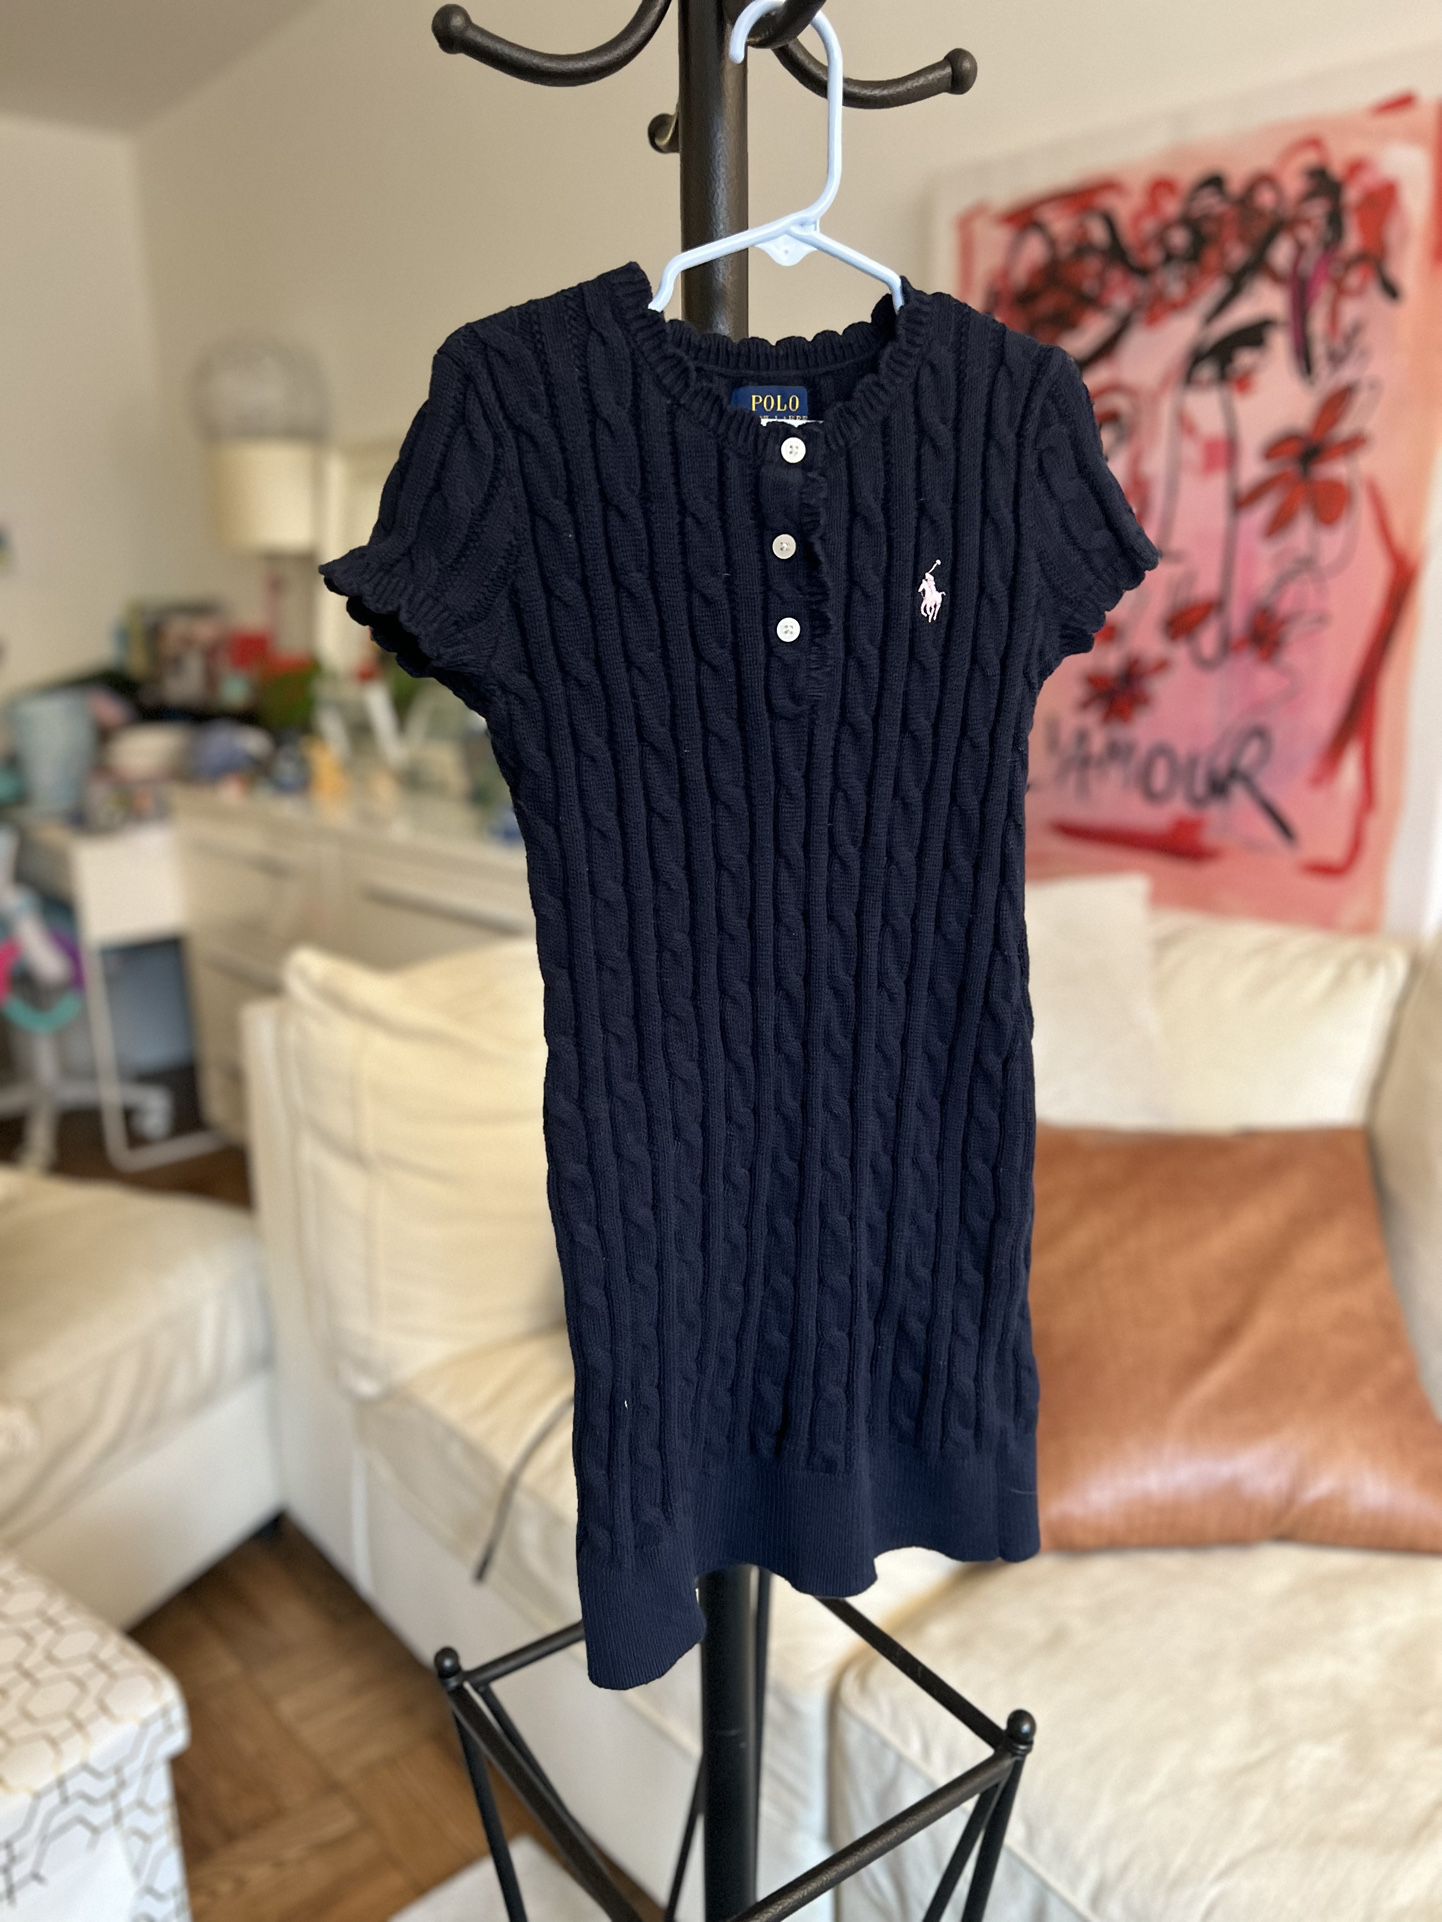 Ralph Lauren Girls Knit Dress for Sale in New York, NY - OfferUp